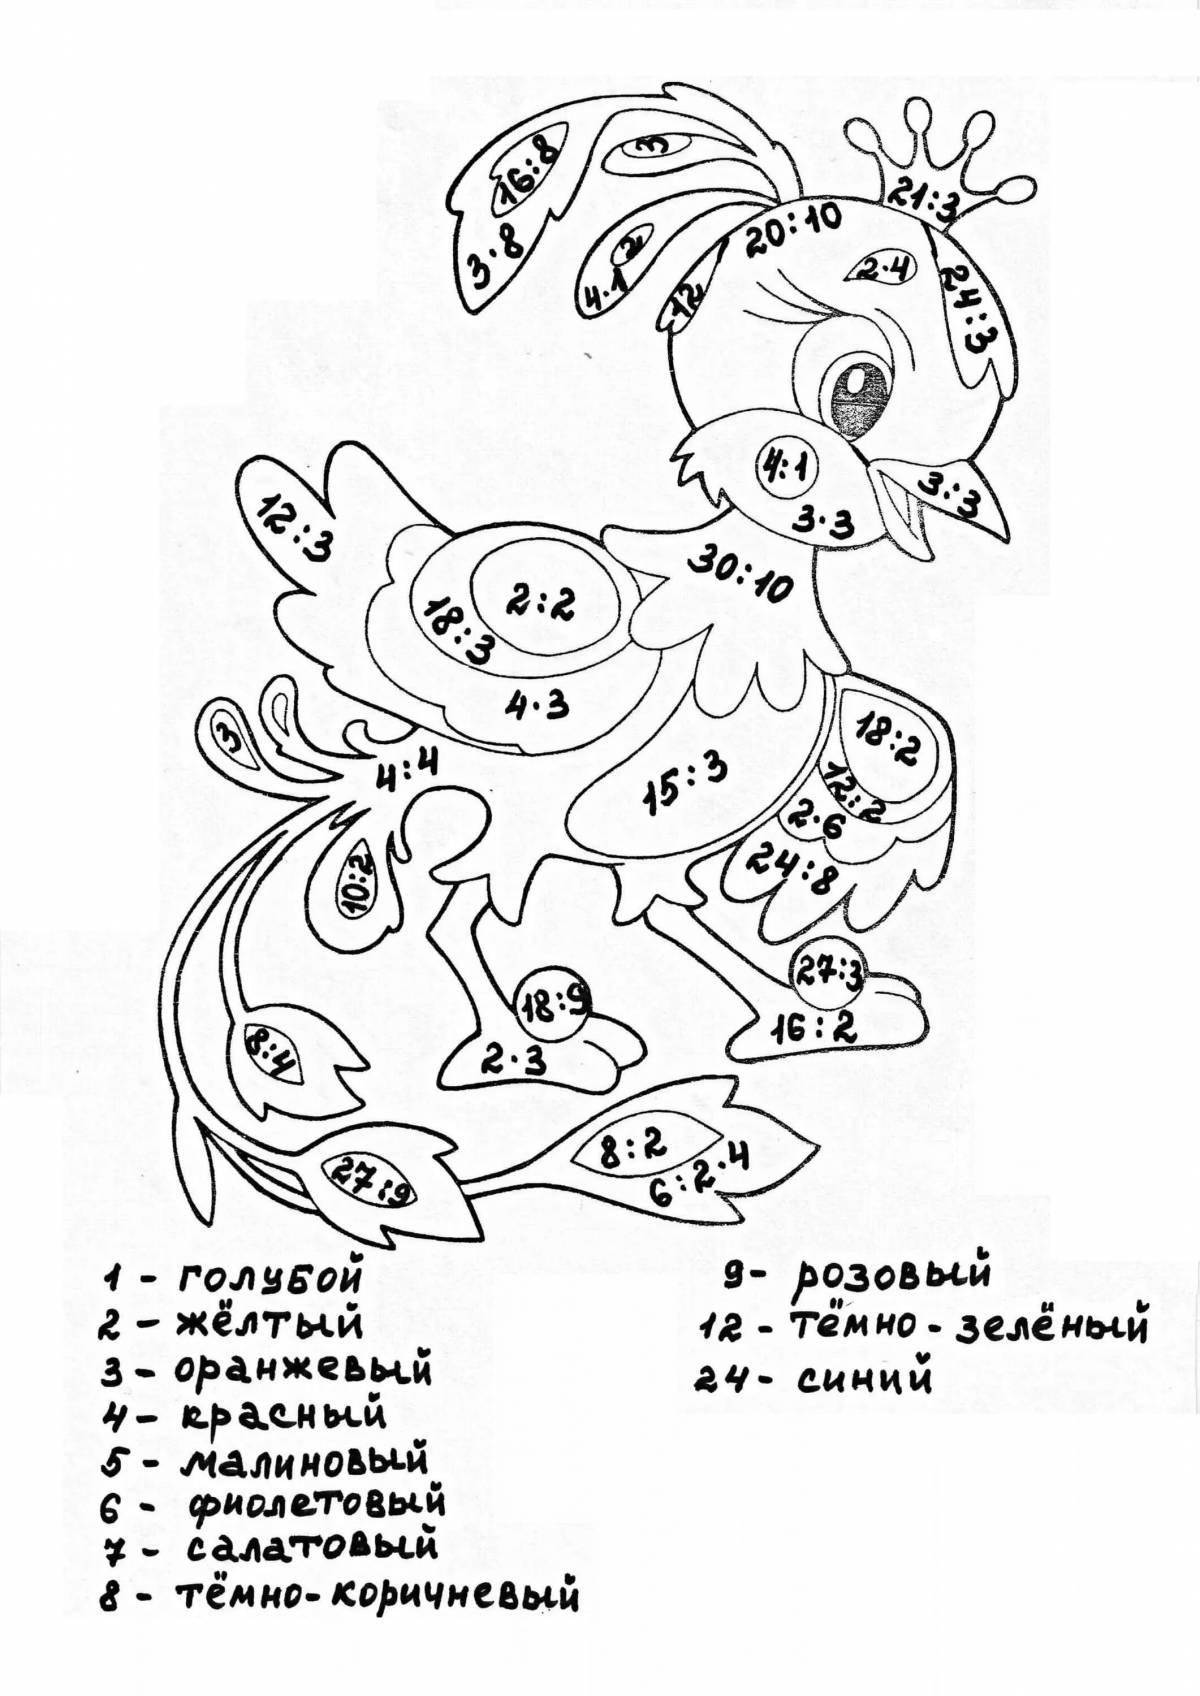 Creative multiplication by 2 and 3 coloring pages